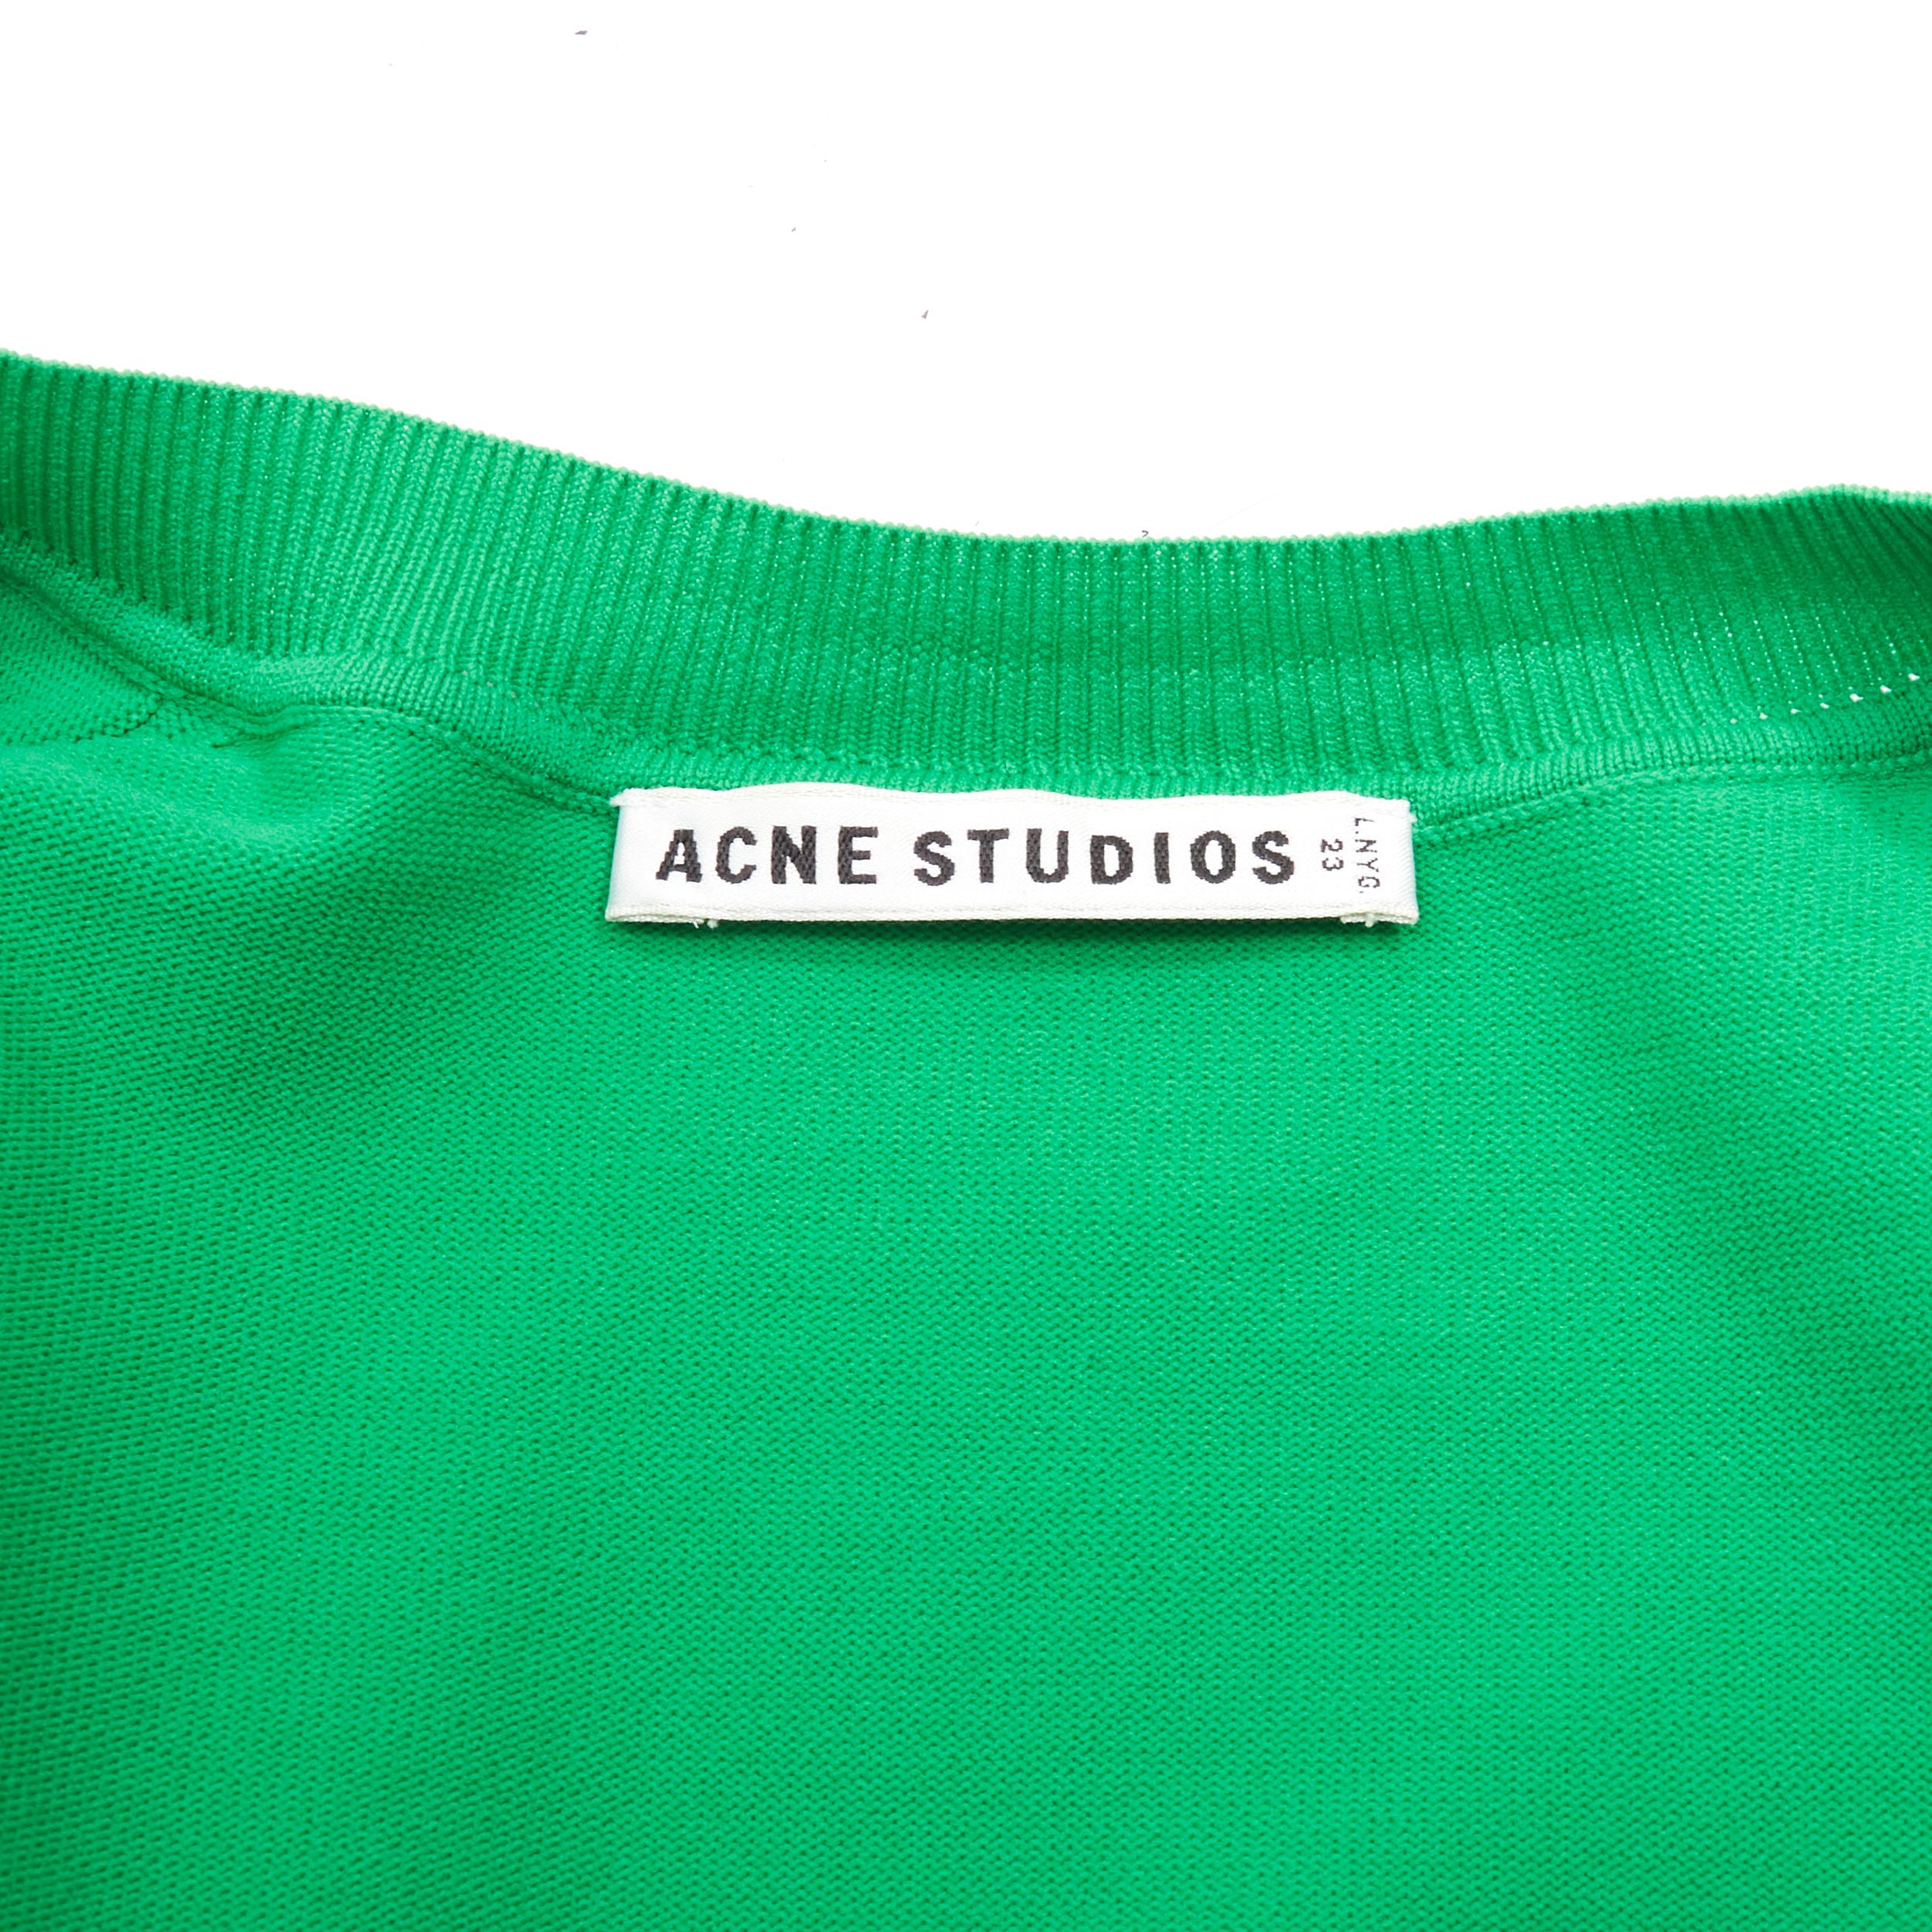 ACNE STUDIOS kelly green perforated cropped cardigan sweater S 2